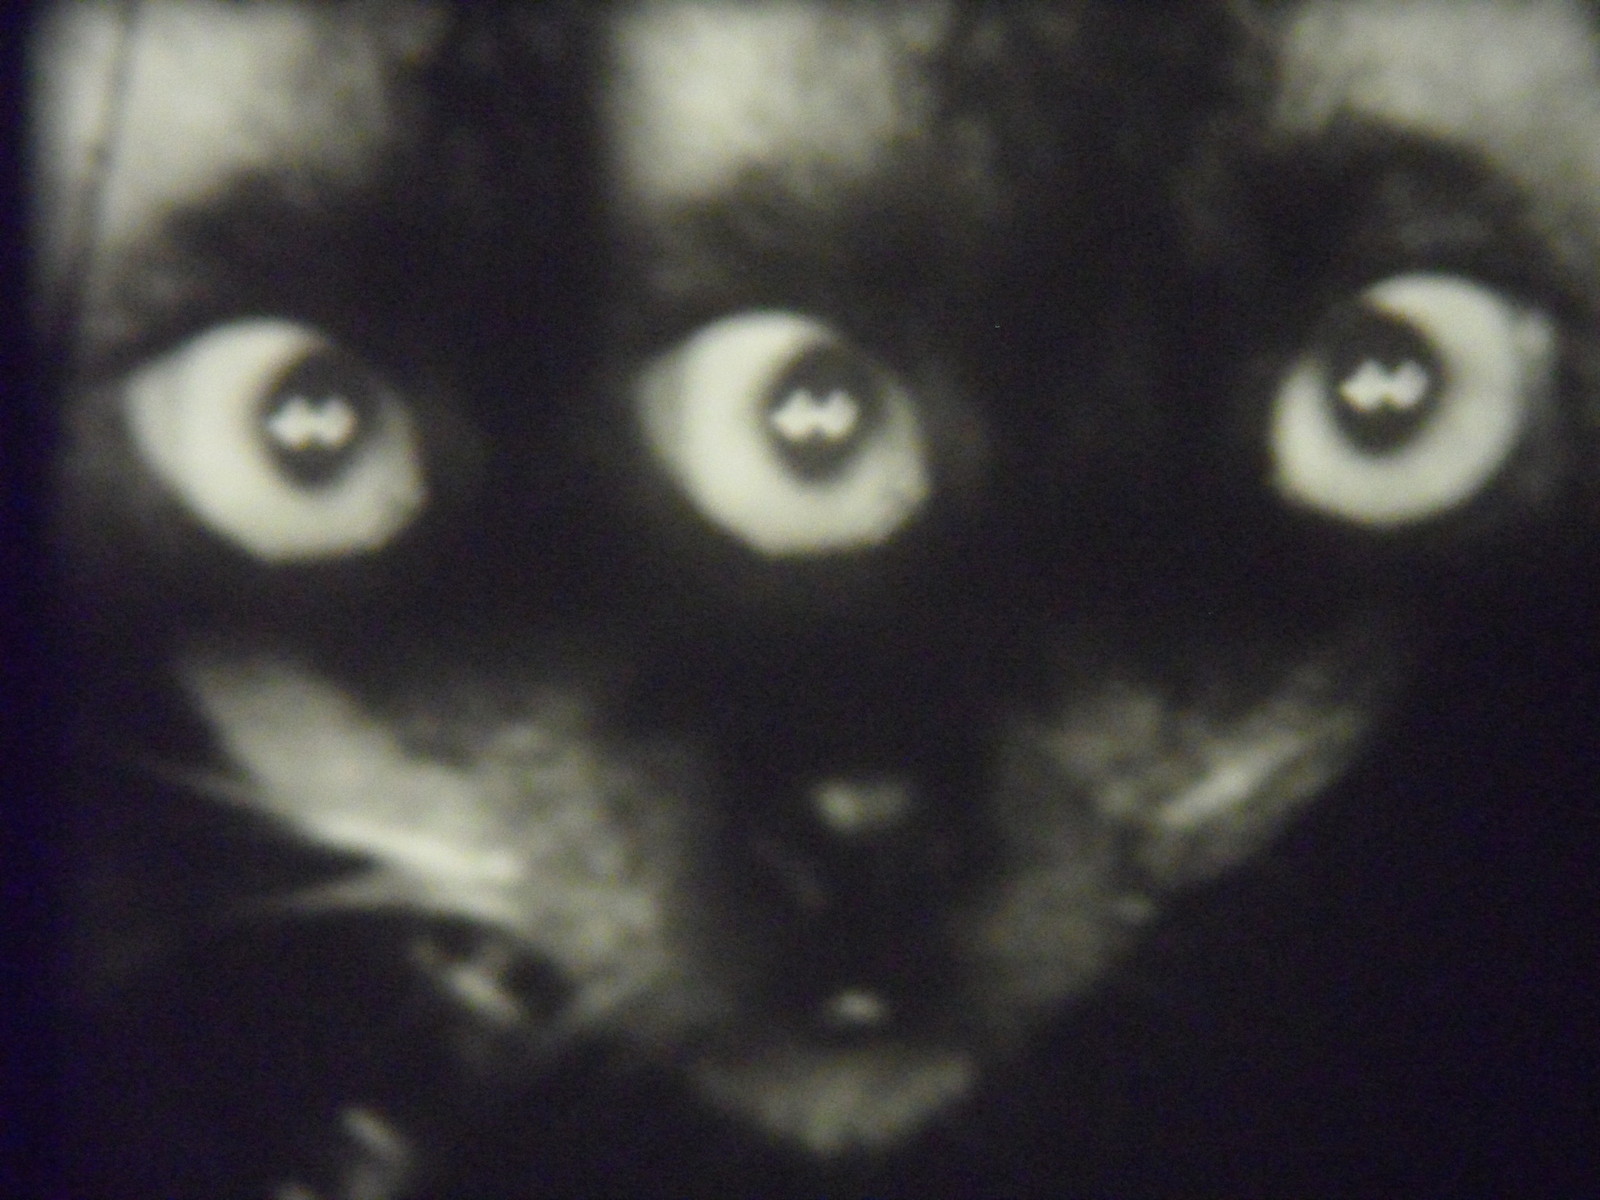 Three Eyed Cat by Weegee